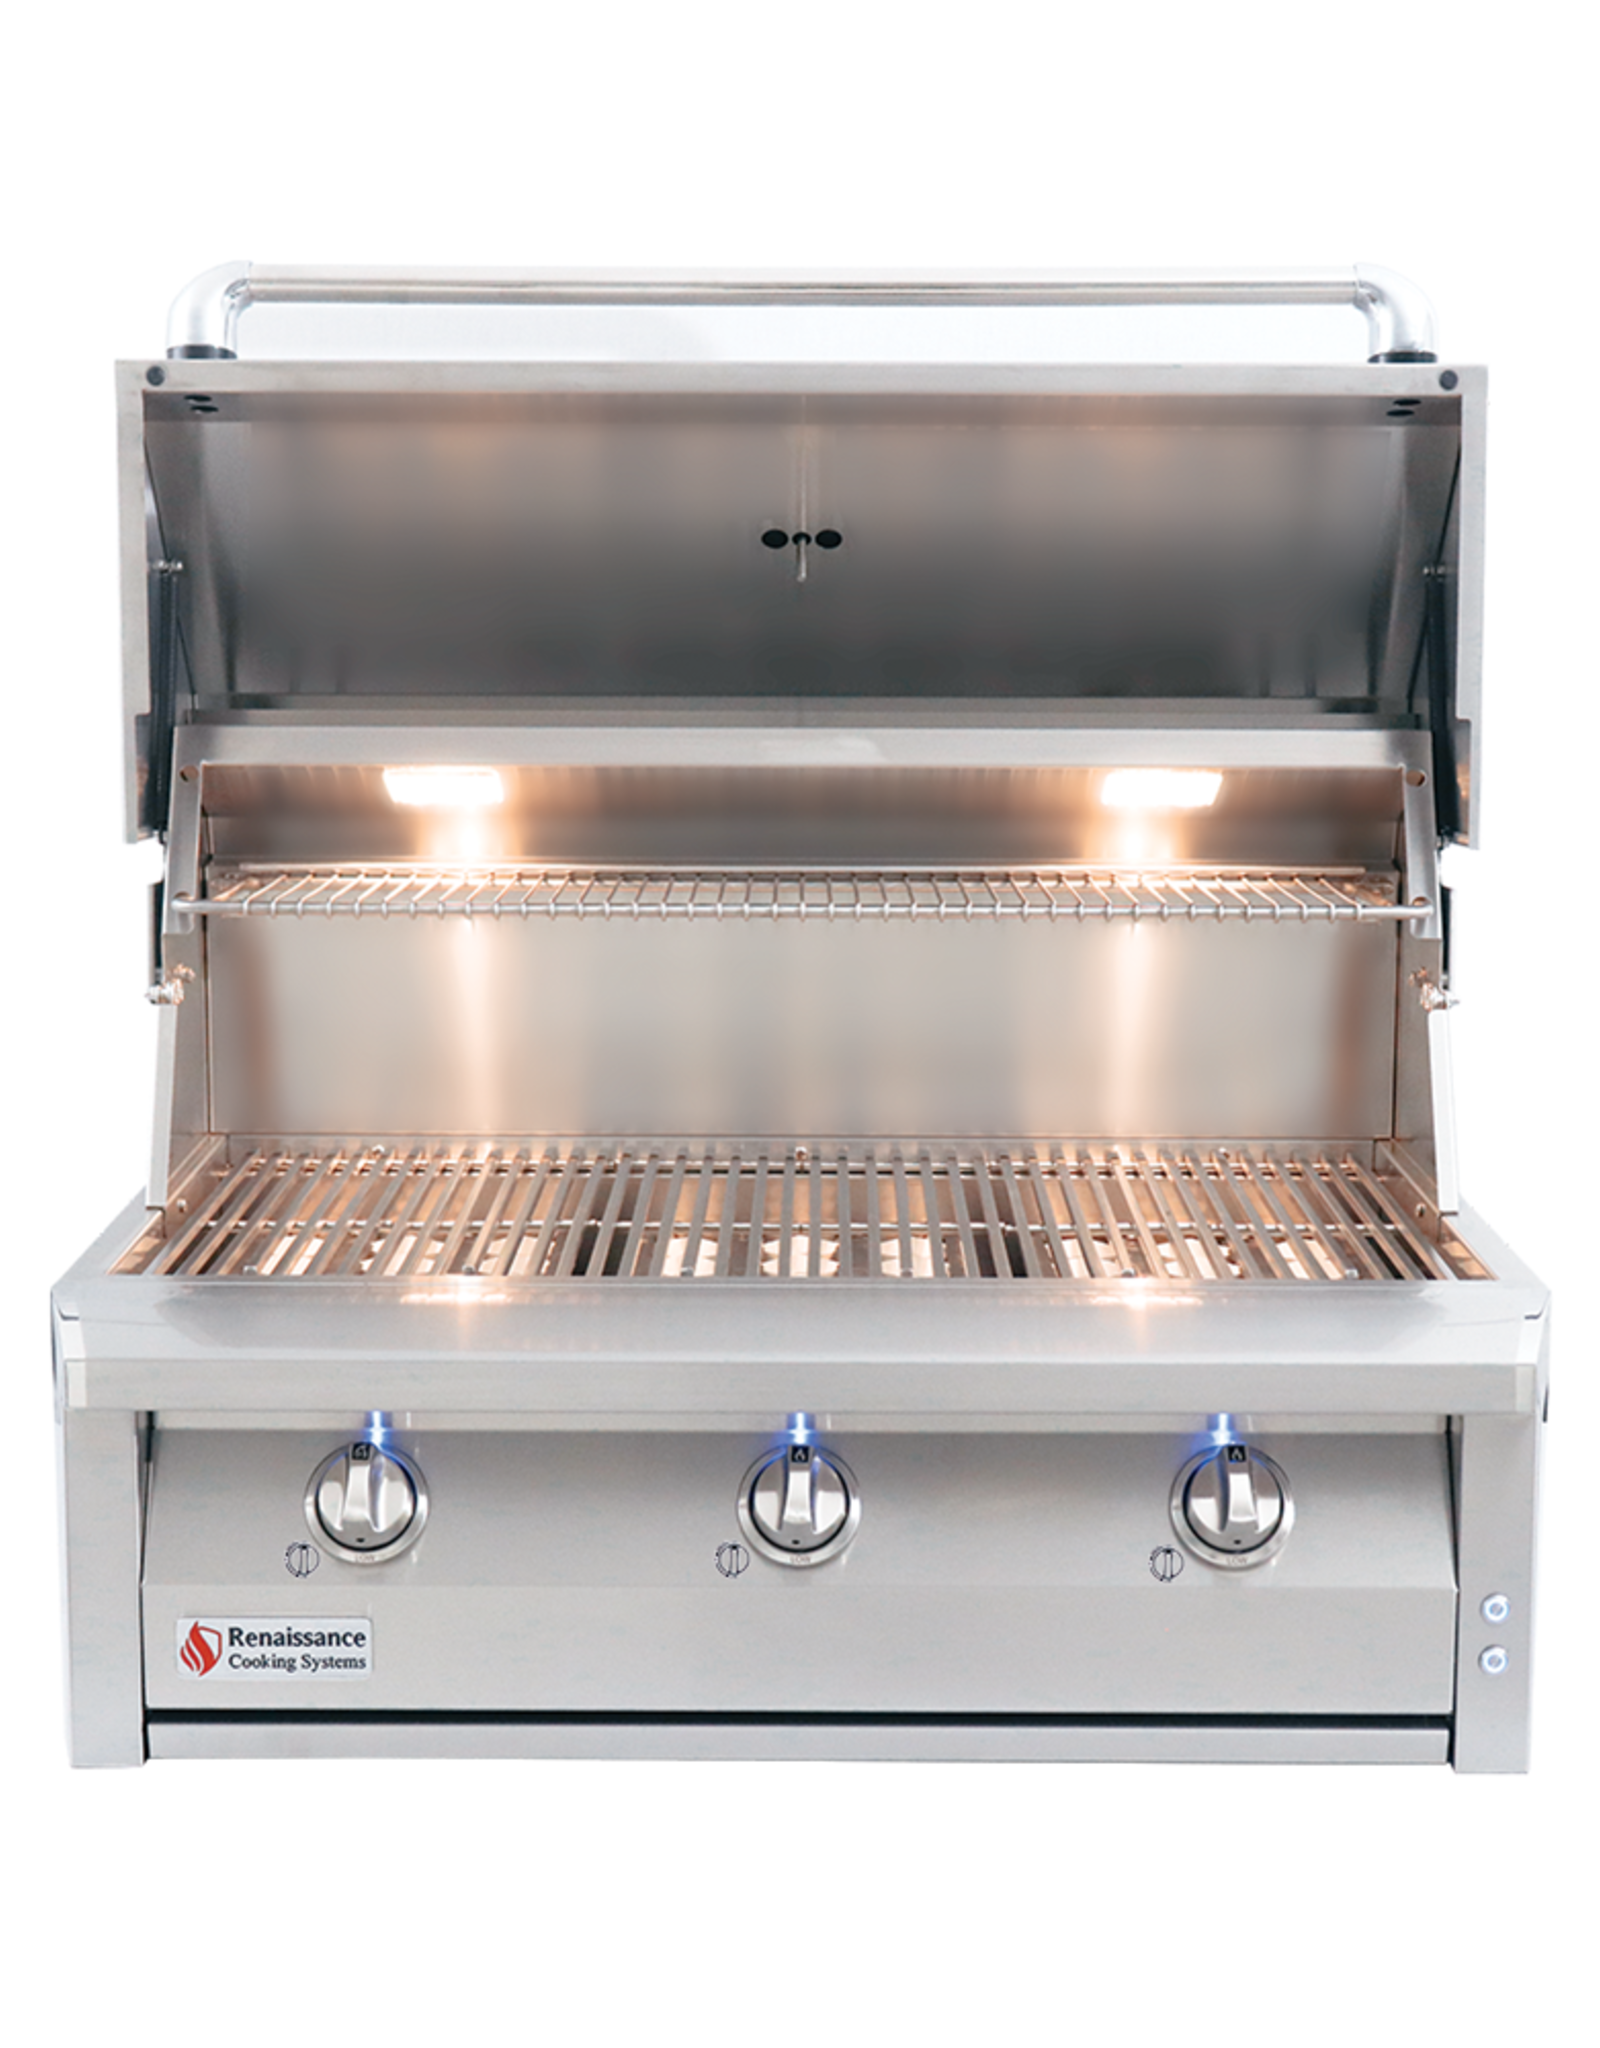 Renaissance Cooking Systems Renaissance Cooking Systems ARG 36" Drop-In  Propane Gas Grill - ARG36 LP